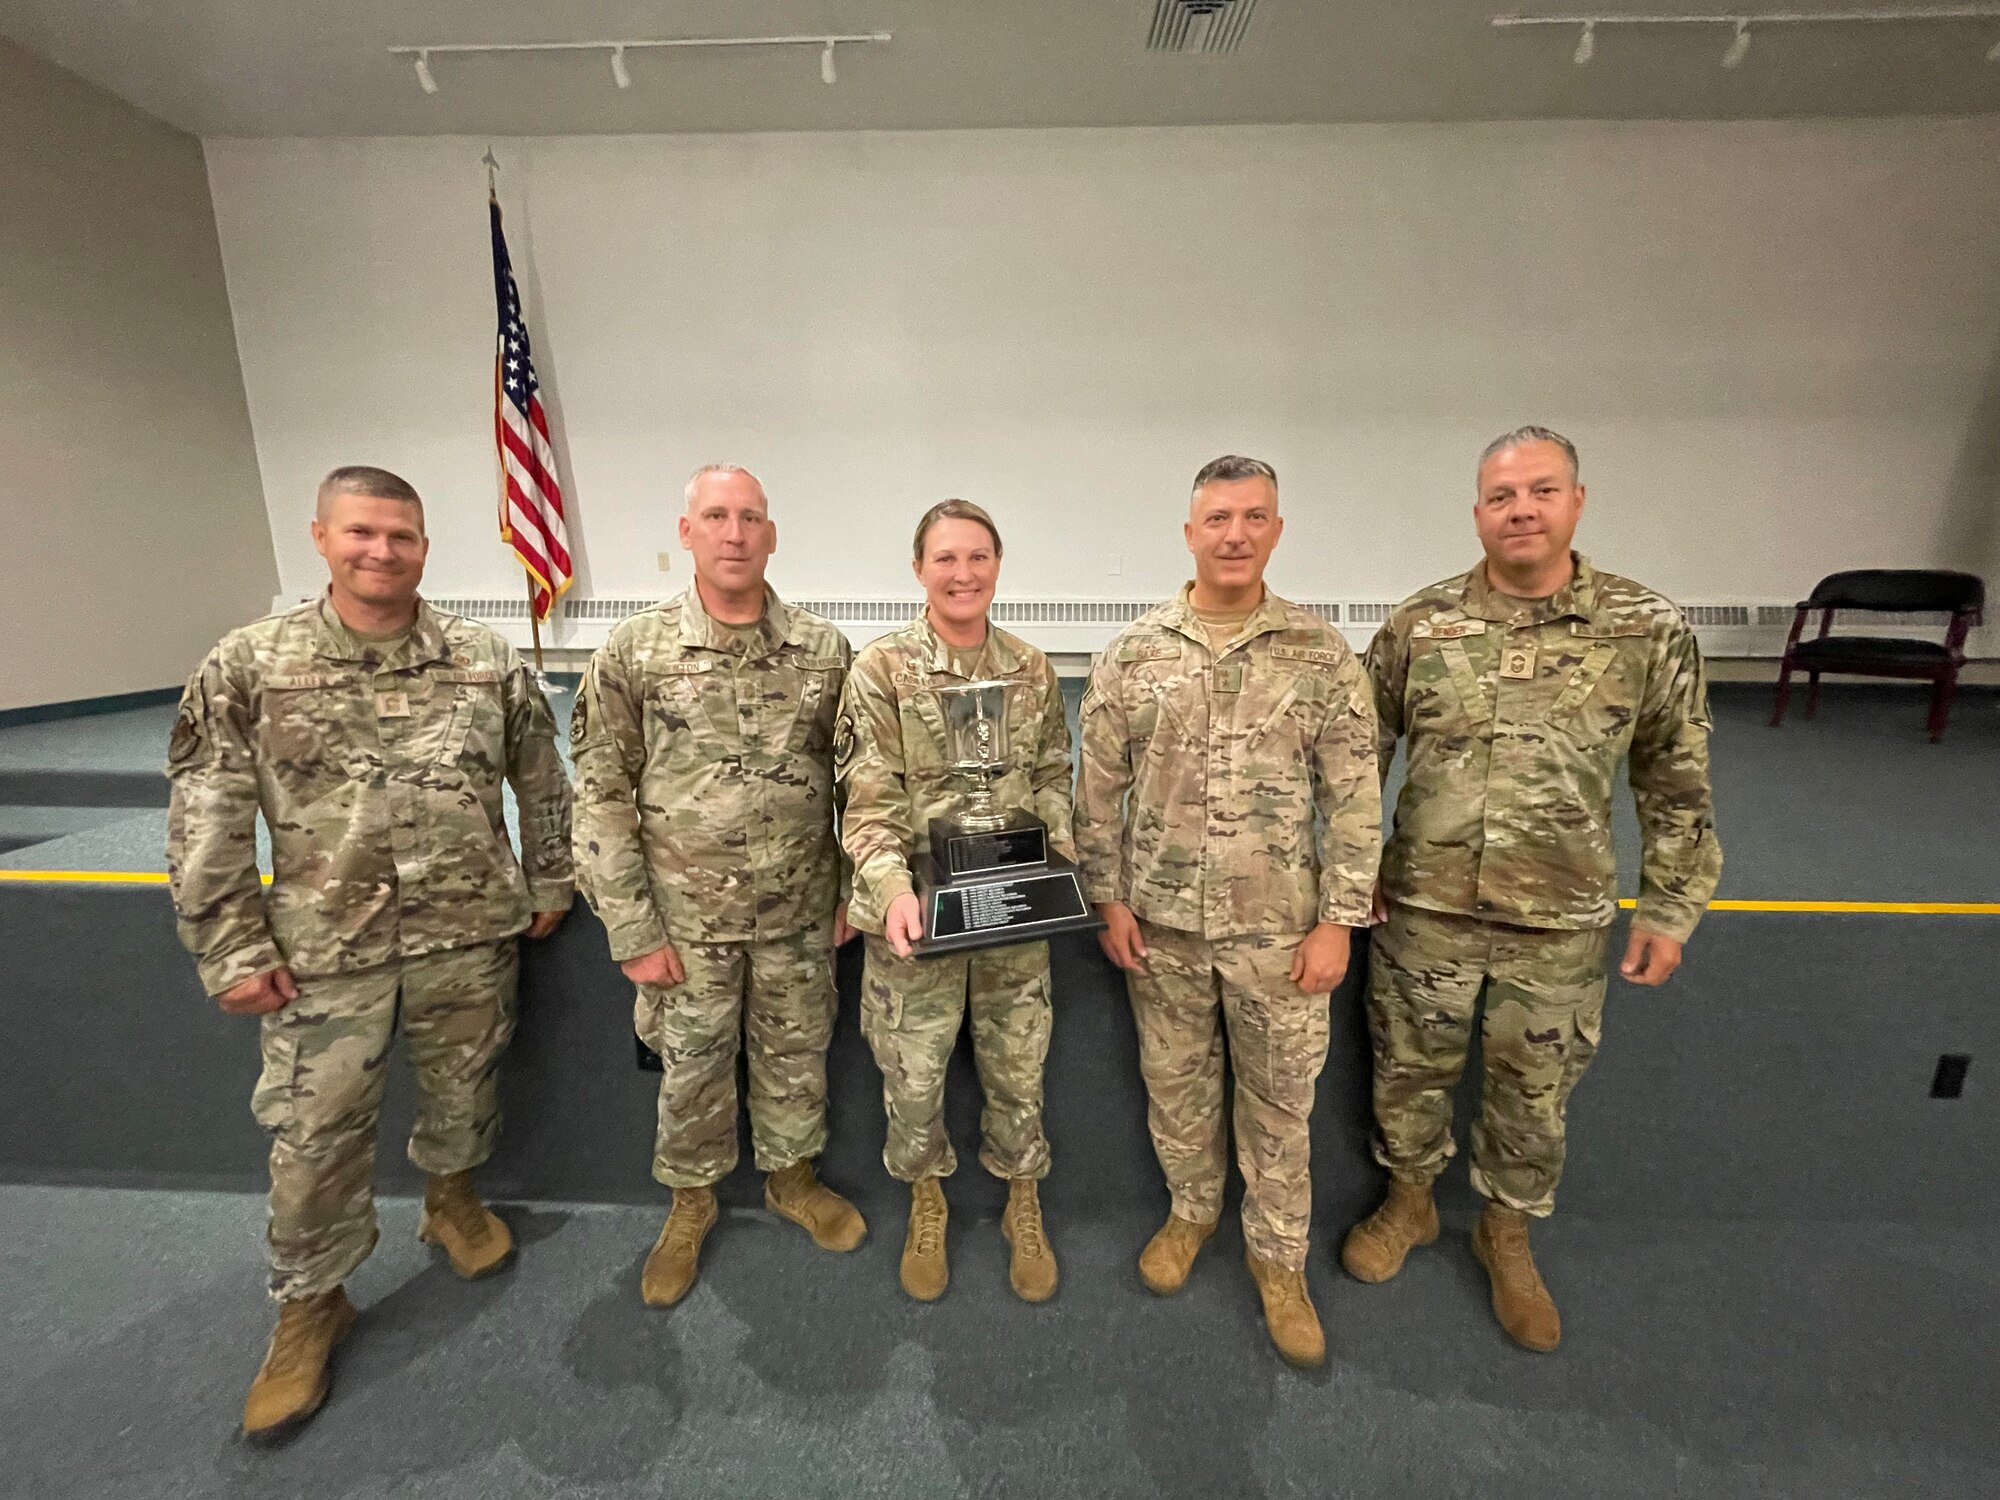 From left, Chief Master Sgt. Ray Allen, Chief Master Sgt. Phillip Newton, Col. Jennifer Casillo, Maj. Gen. Torrence Saxe and Chief Master Sgt. George Bender pose for a photo with the Alaska Governor’s Trophy